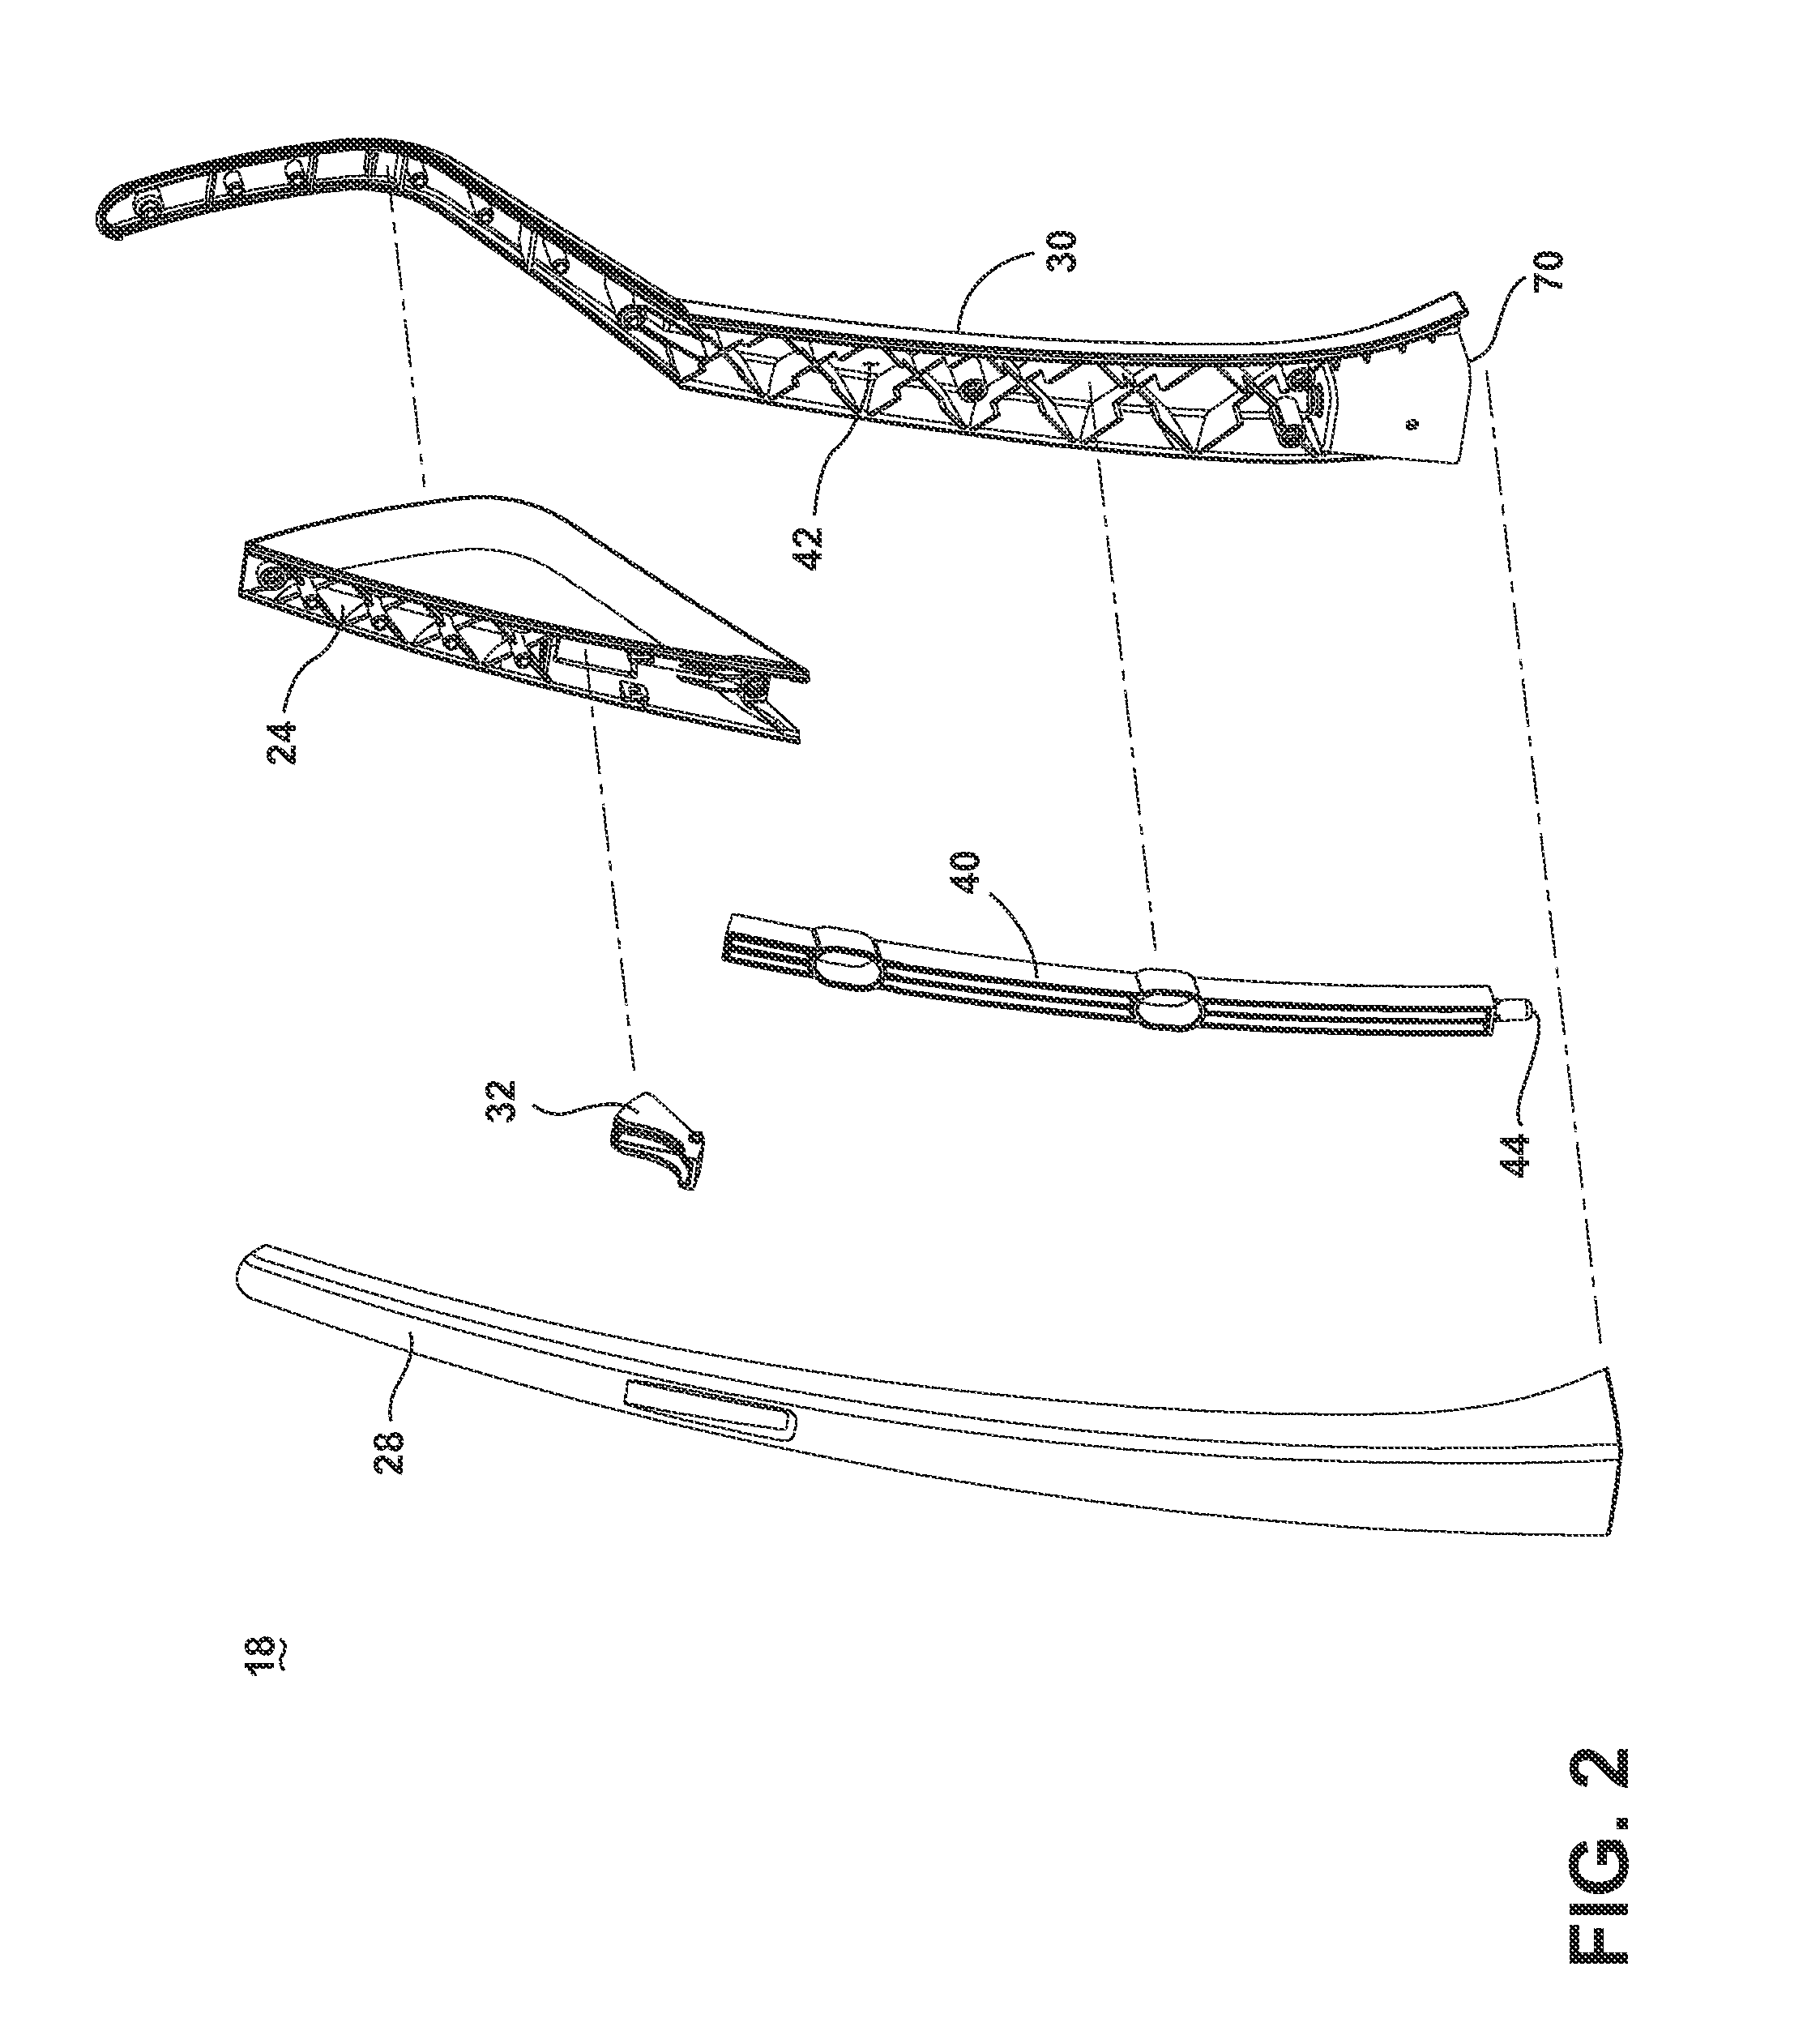 Surface cleaning apparatus